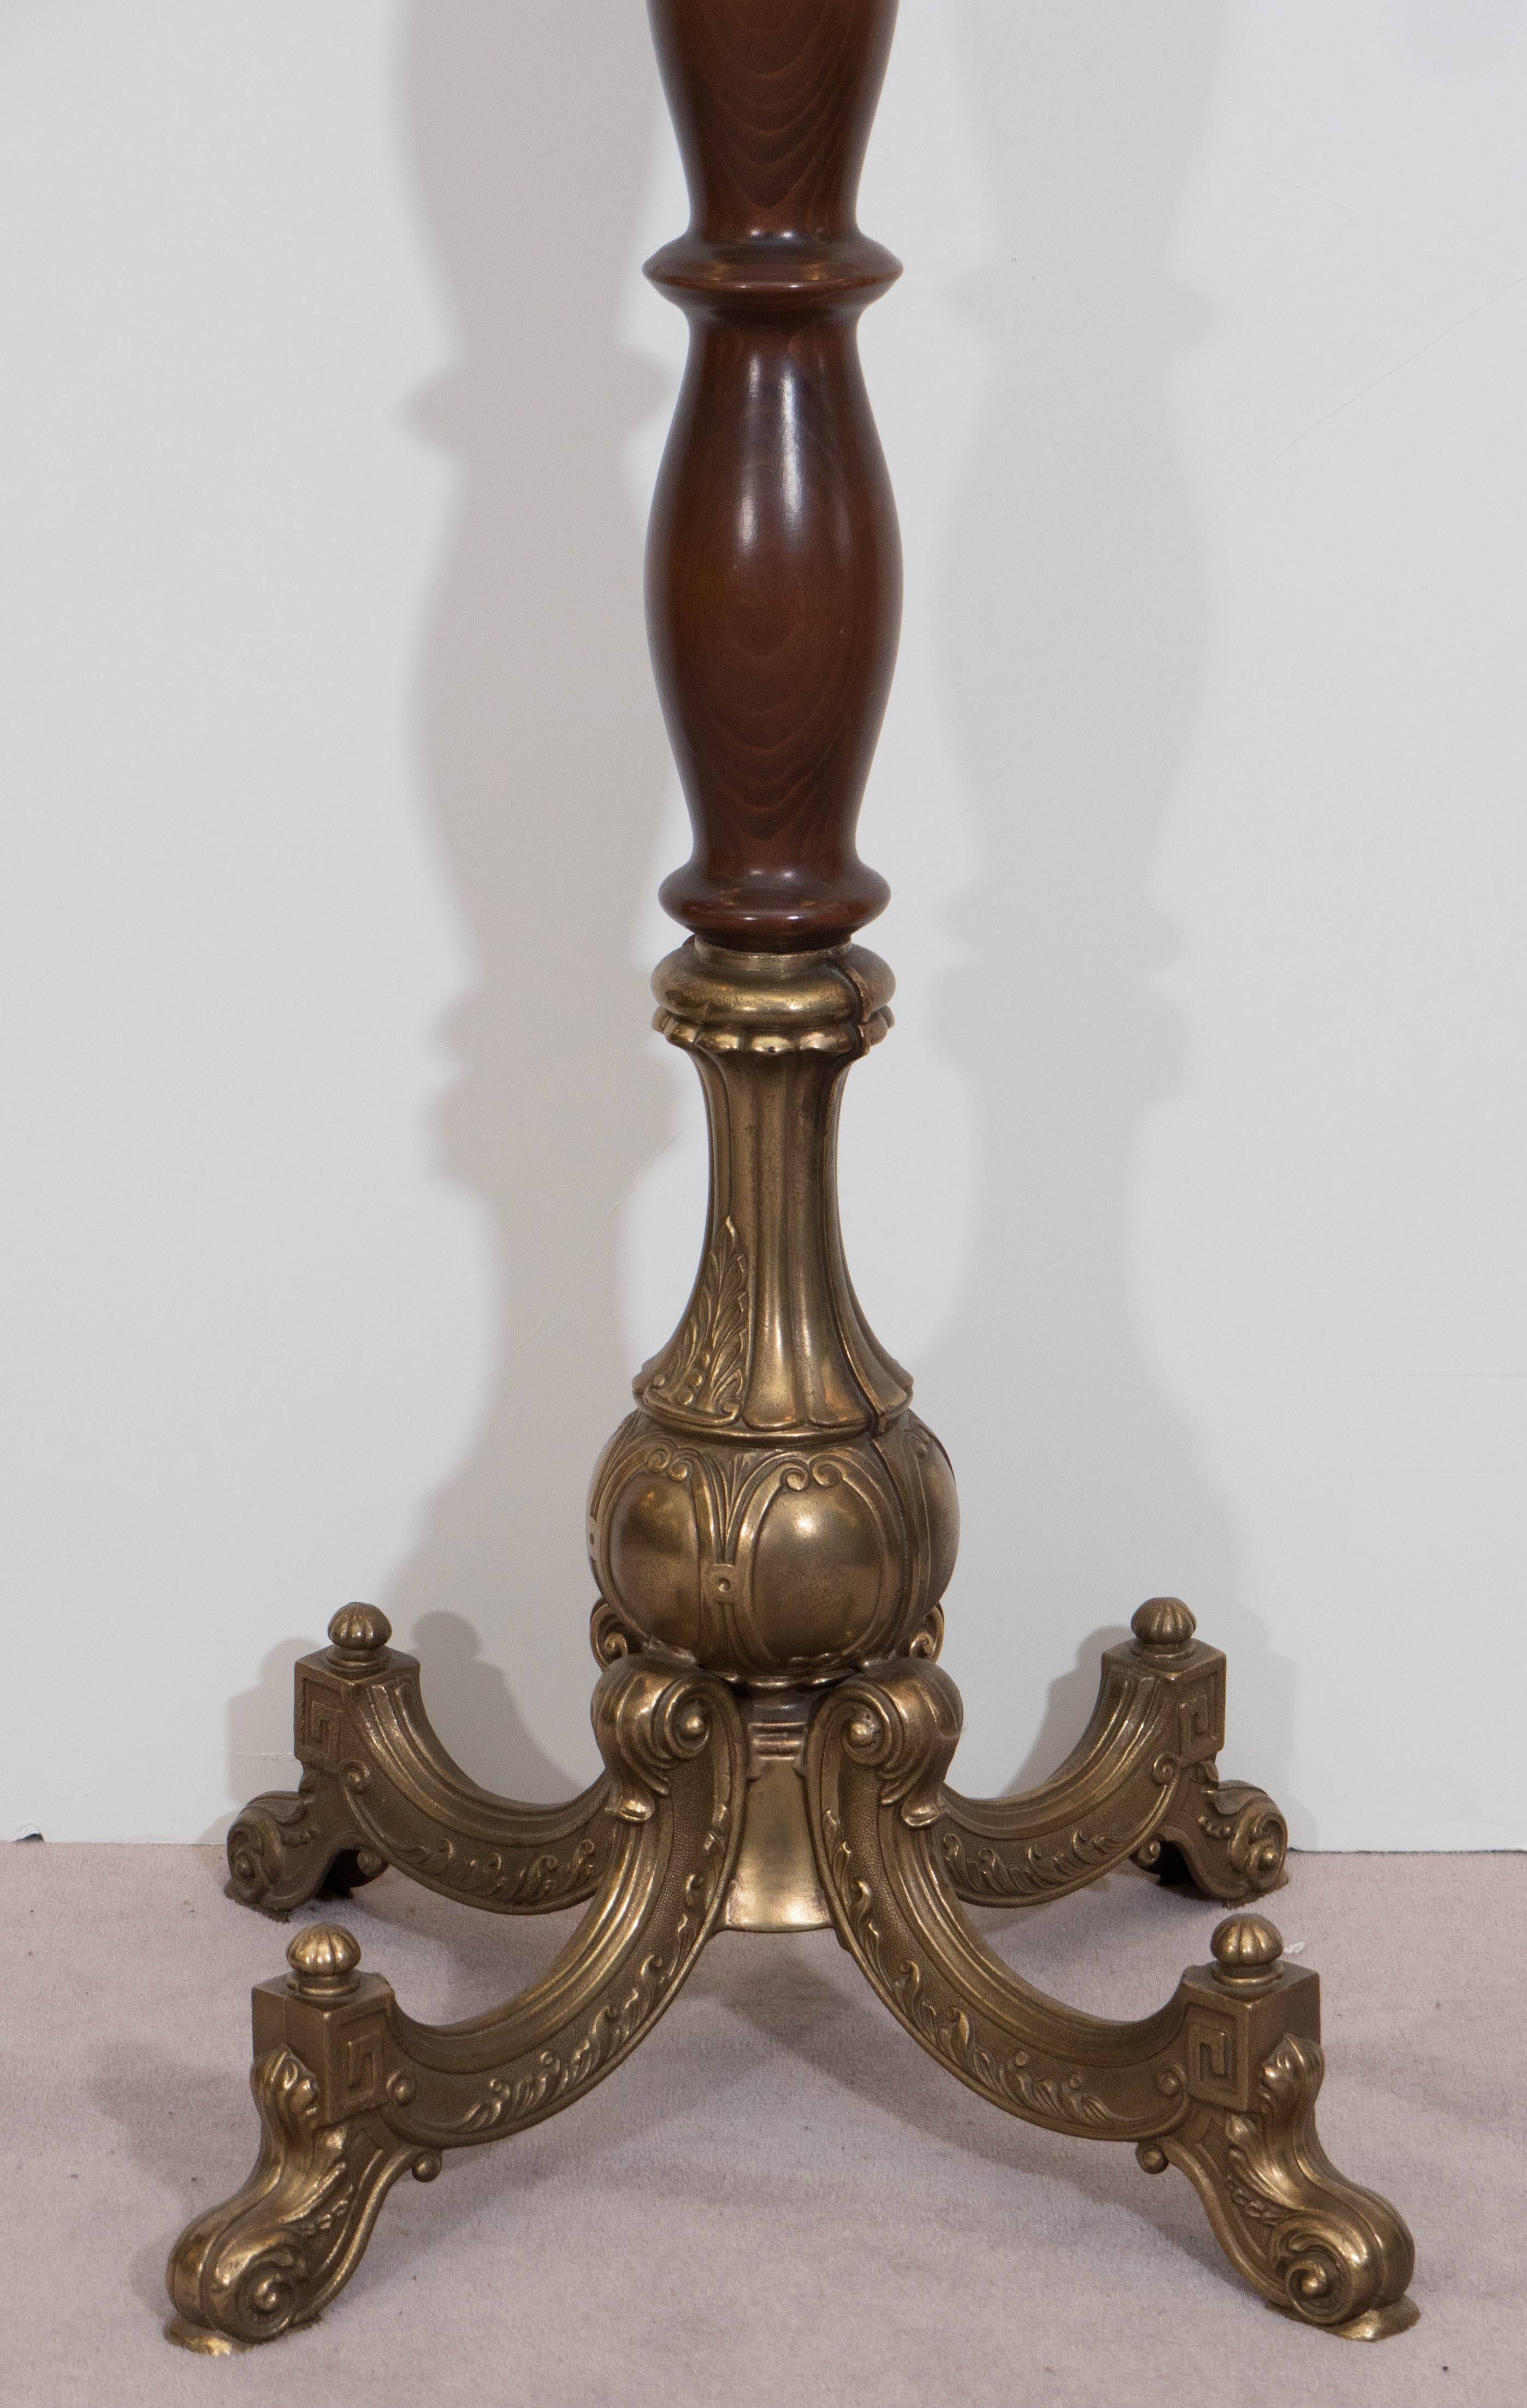 An elegant Italian coat rack, produced, circa 1910, with a turned baluster wood stem, which includes eight coat hooks and four purse hooks in bronze, beautifully detailed, evoking classical style and design. Very good vintage condition, with age